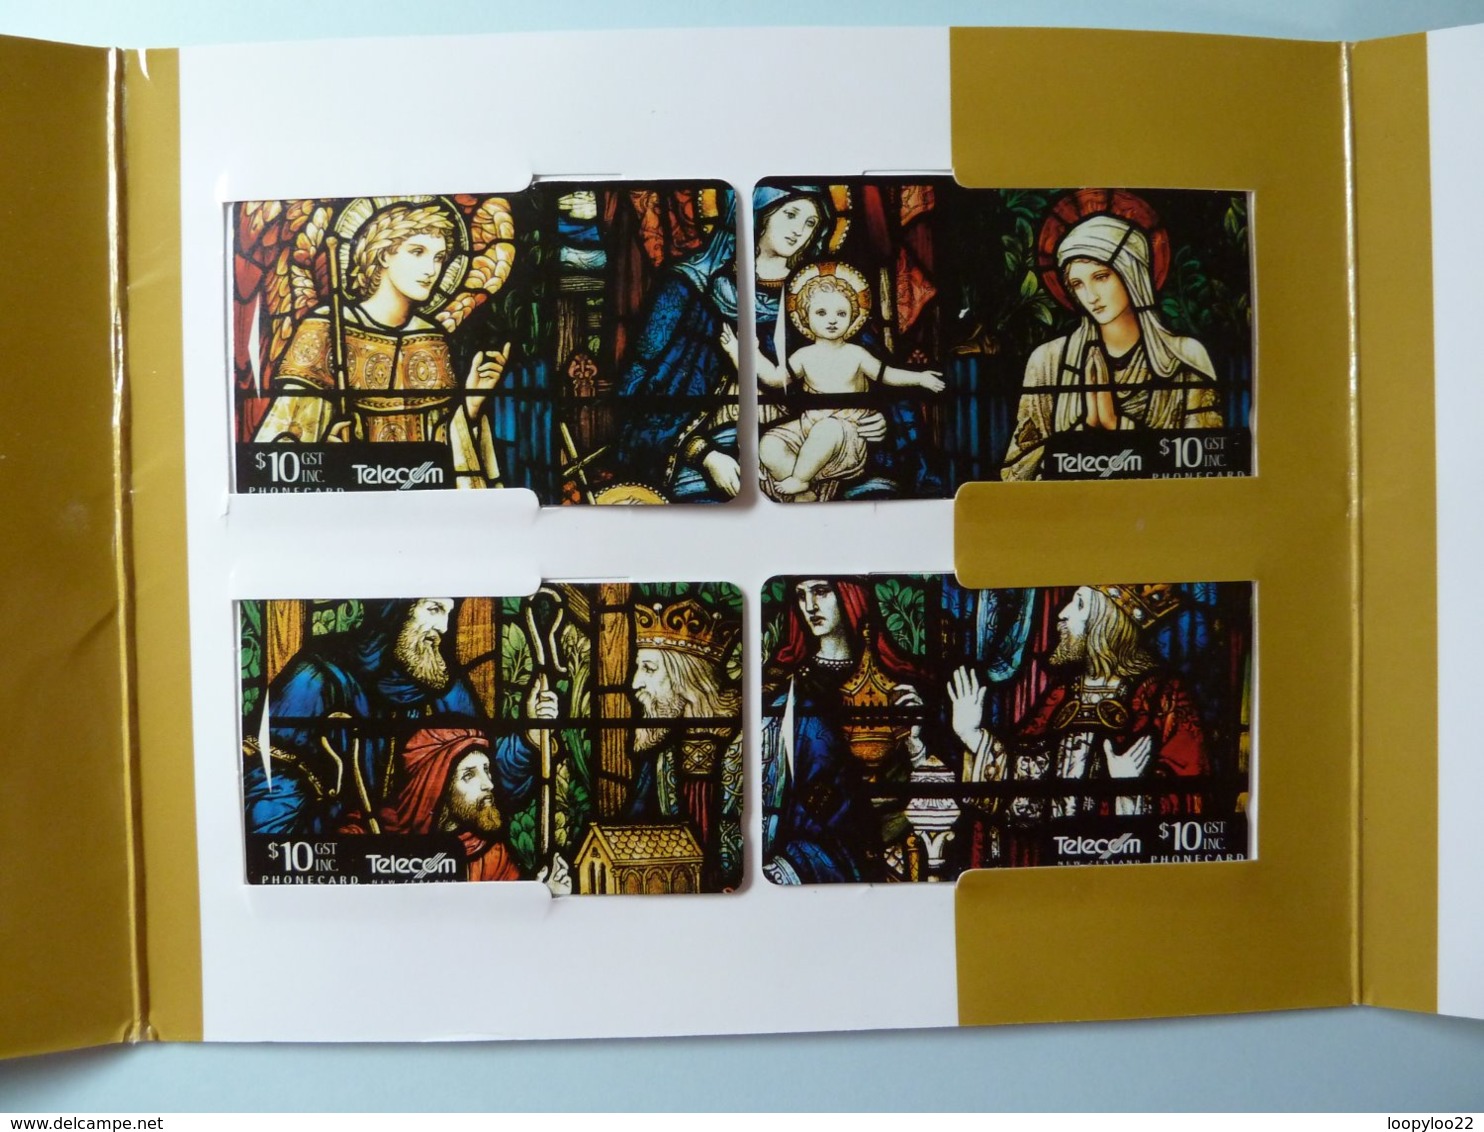 New Zealand - GPT - Stained Glass Windows - Phonecard & Stamp - Limited Edition 3000ex & Certificate - Mint In Folder - Neuseeland